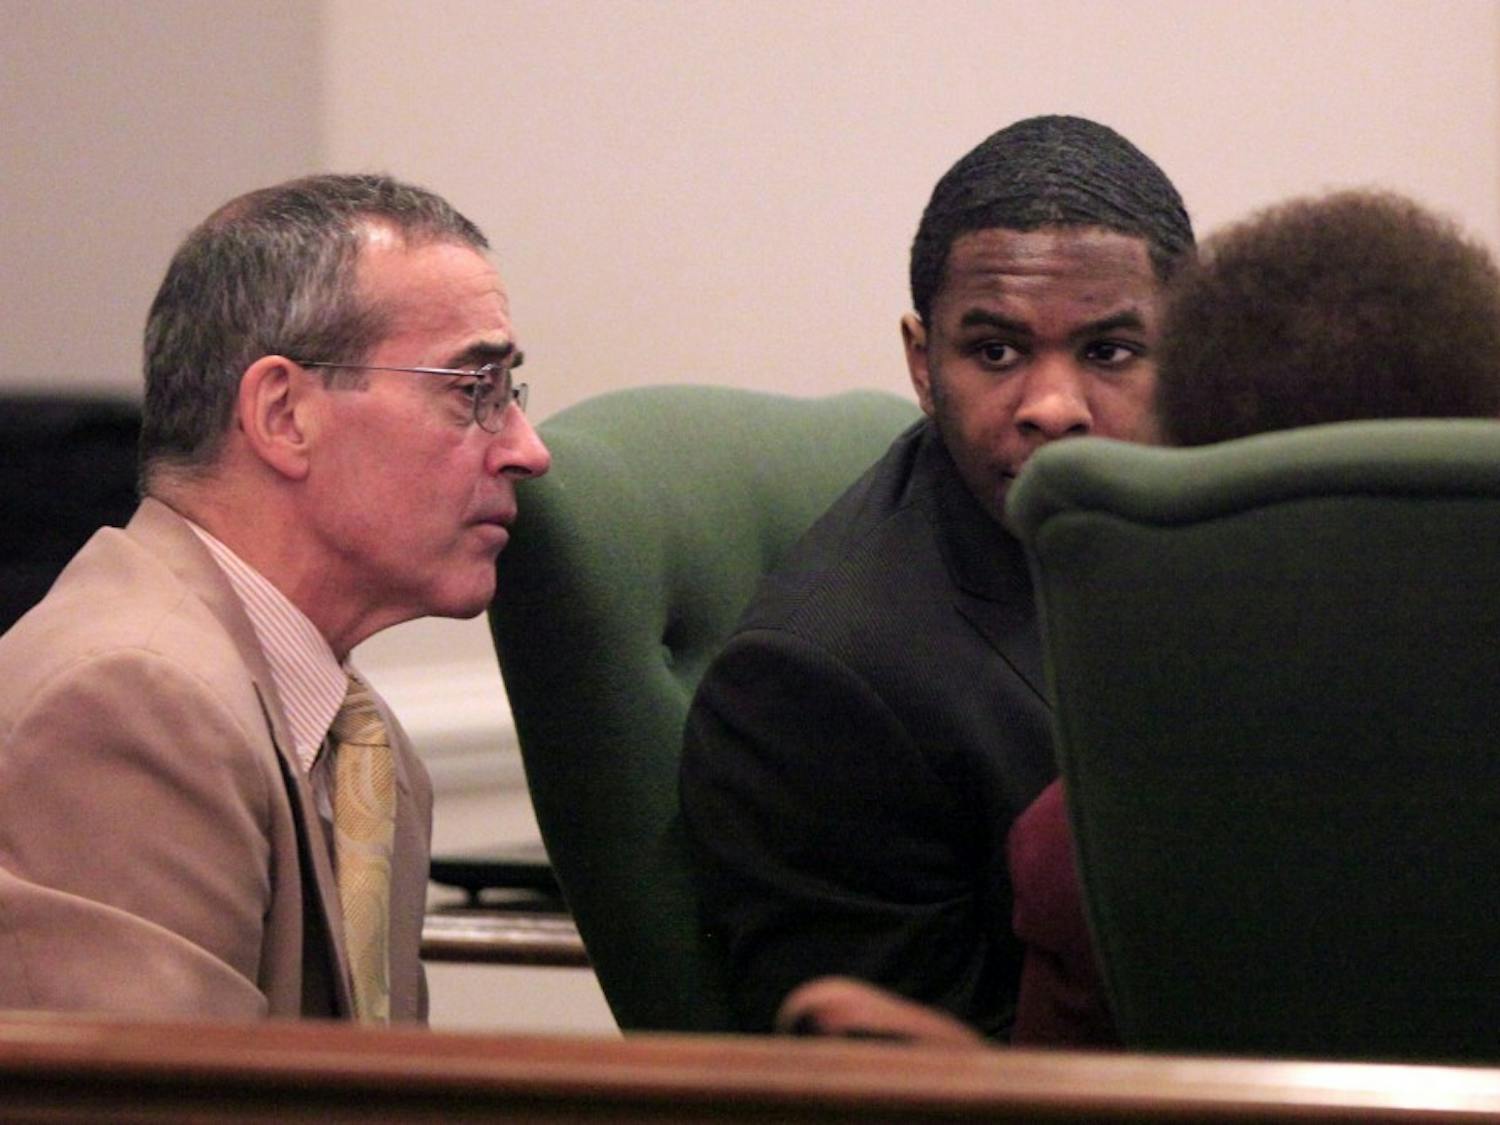 Laurence Alvin Lovette Jr. talks to his lawyers Kevin Bradley and Karen Bethea-Shields Tuesday, Dec. 20, 2011.  A jury found Lovette guilty of kidnapping, robbing and murdering Eve Carson, the 2008 UNC-Chapel Hill student body president. He received a life prison sentence without the possibility of parole.The verdict capped seven and a half days of testimony in Orange County Superior Court.